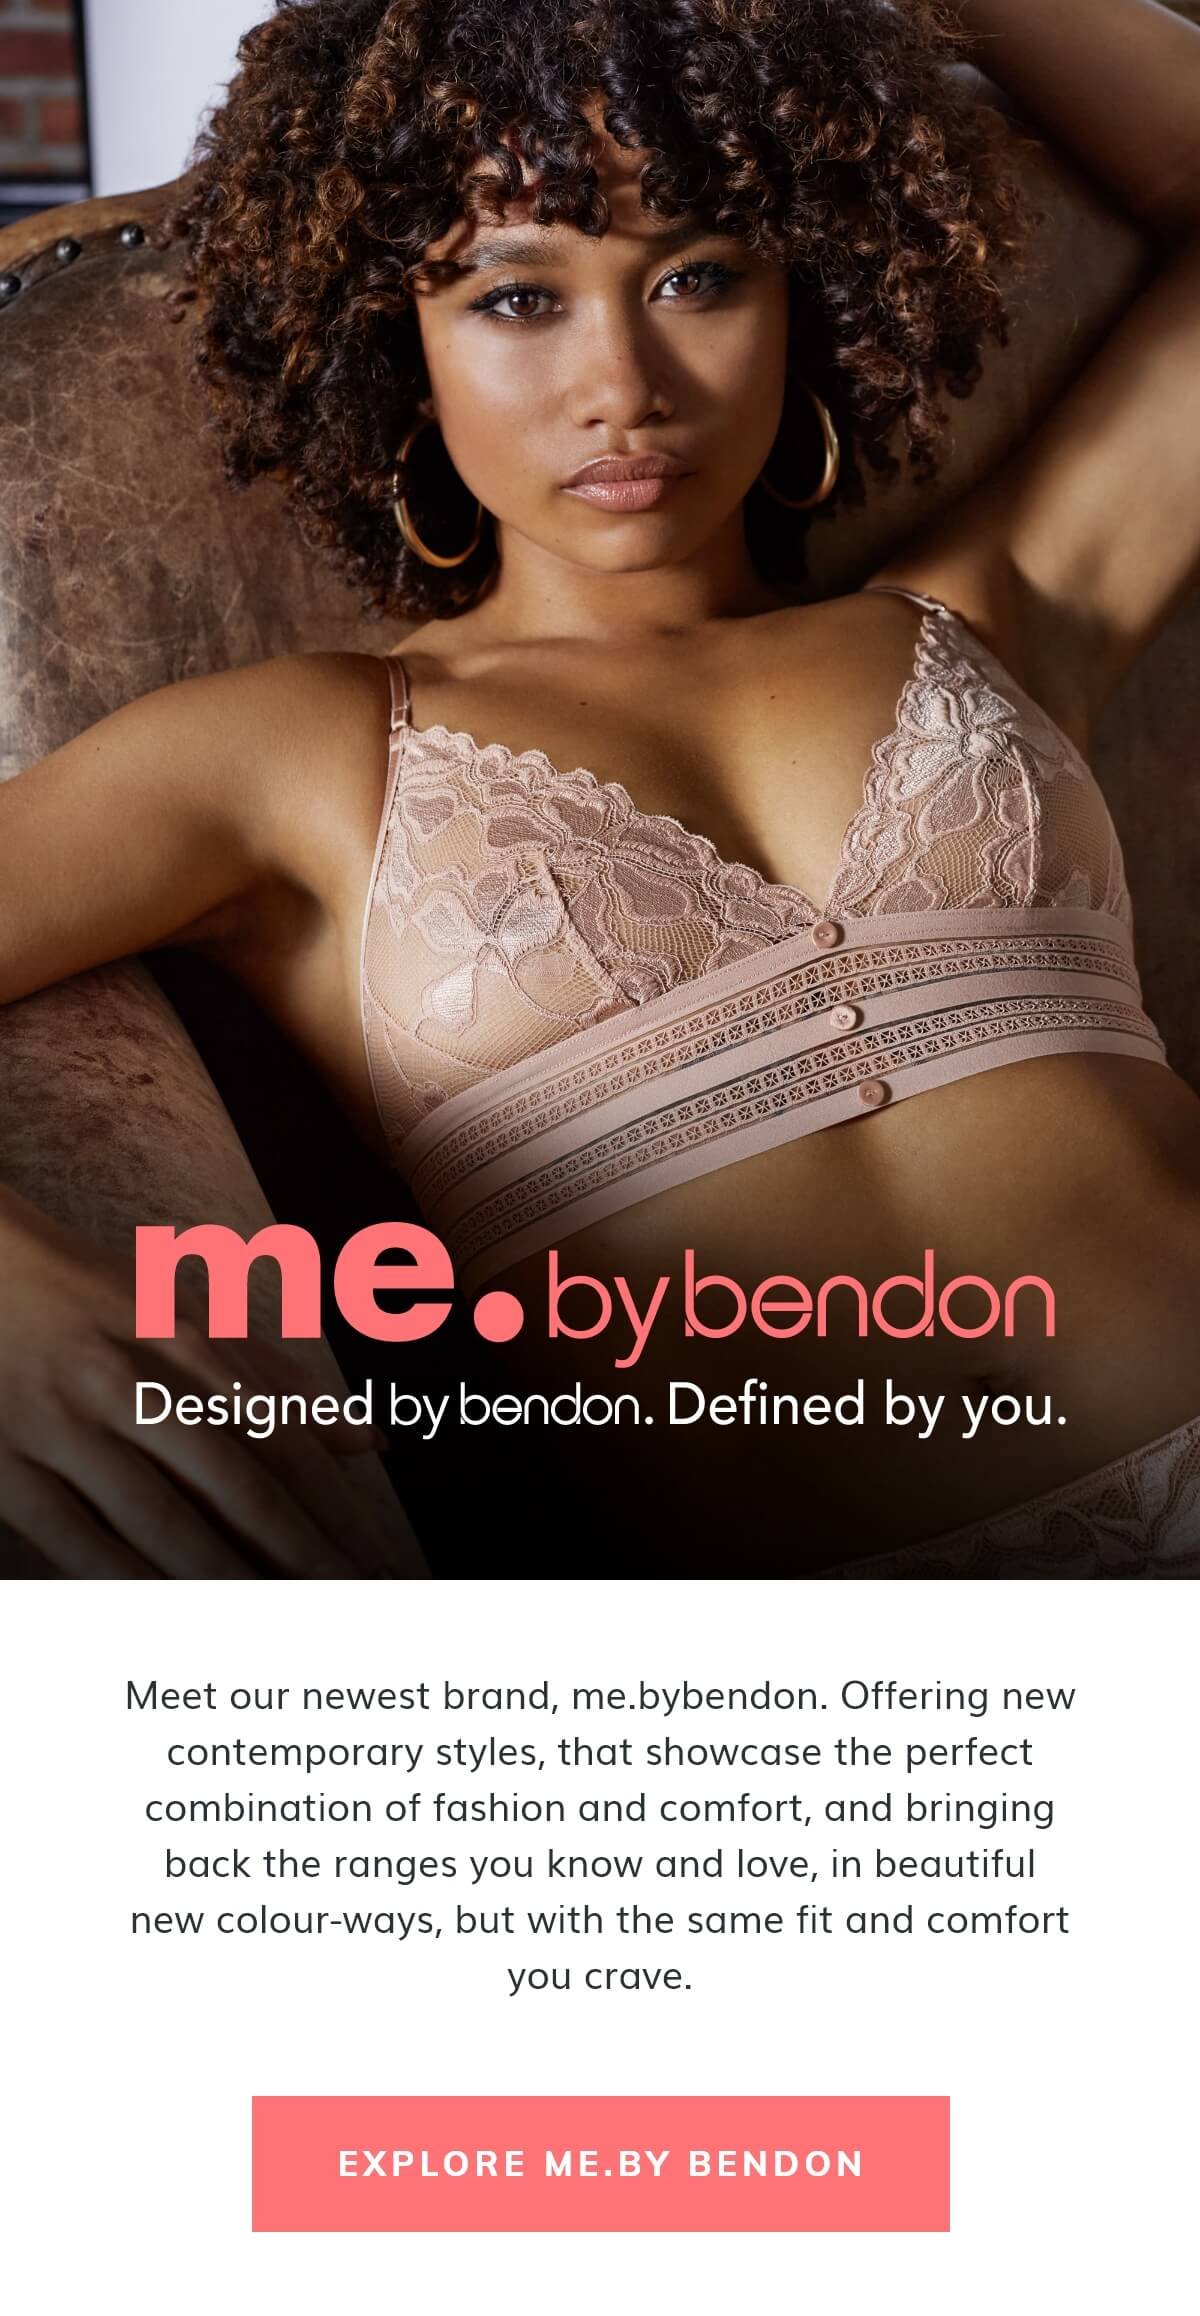 Bendon Lingerie AU: The brand defined by YOU